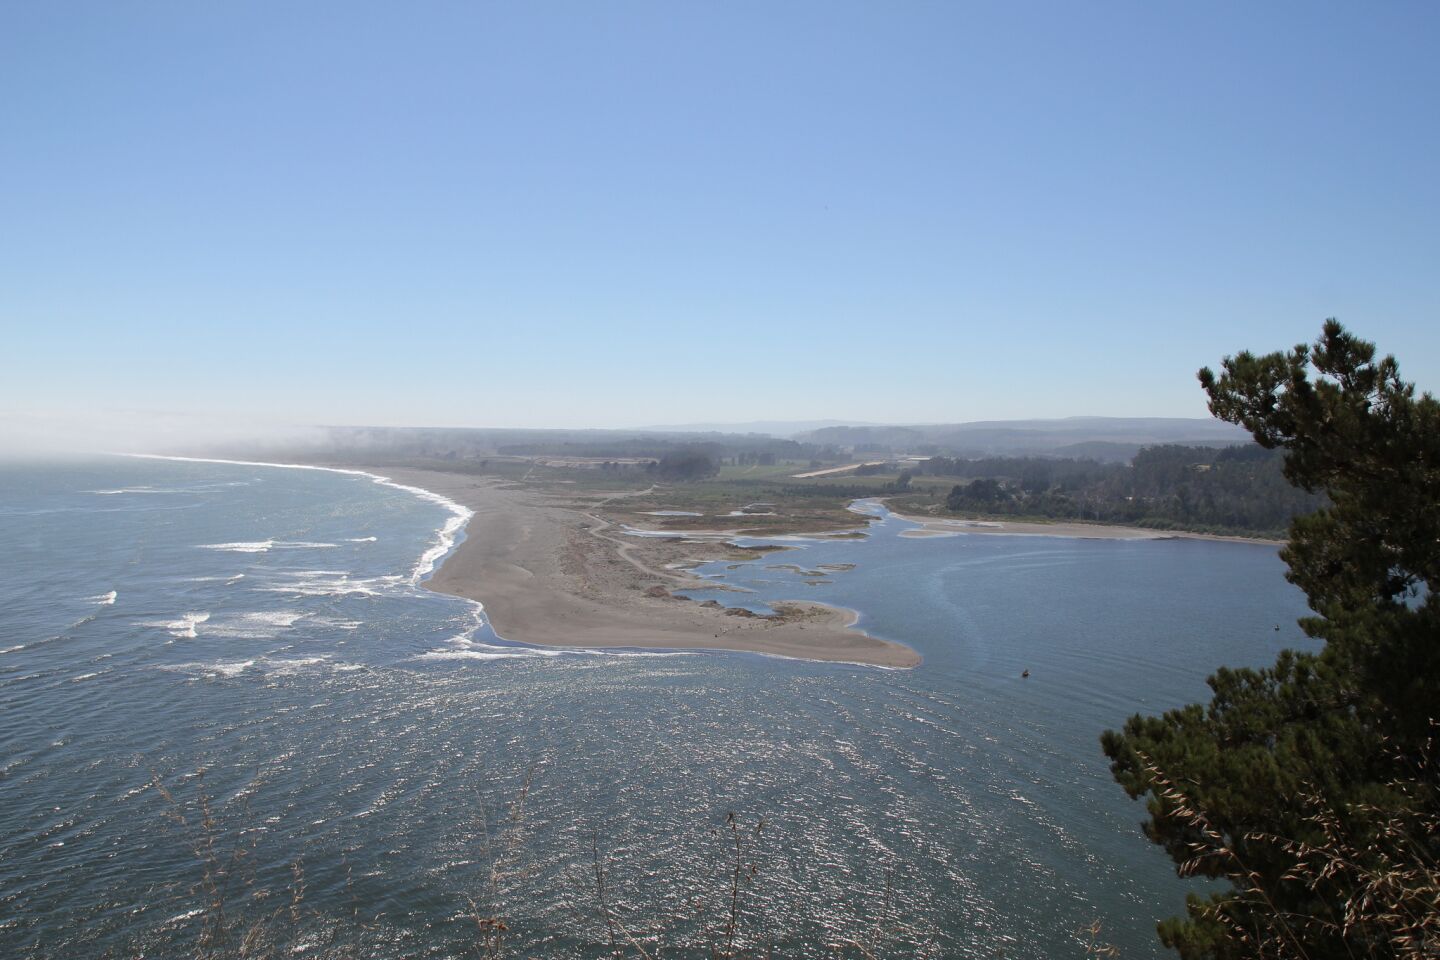 Constitución sits at the mouth of the Maule River and is subject to earthquakes and seasonal flooding, in addition to the occasional tsunami. This is the view north, from Mutrún Hill. The Pacific Ocean is to the left.